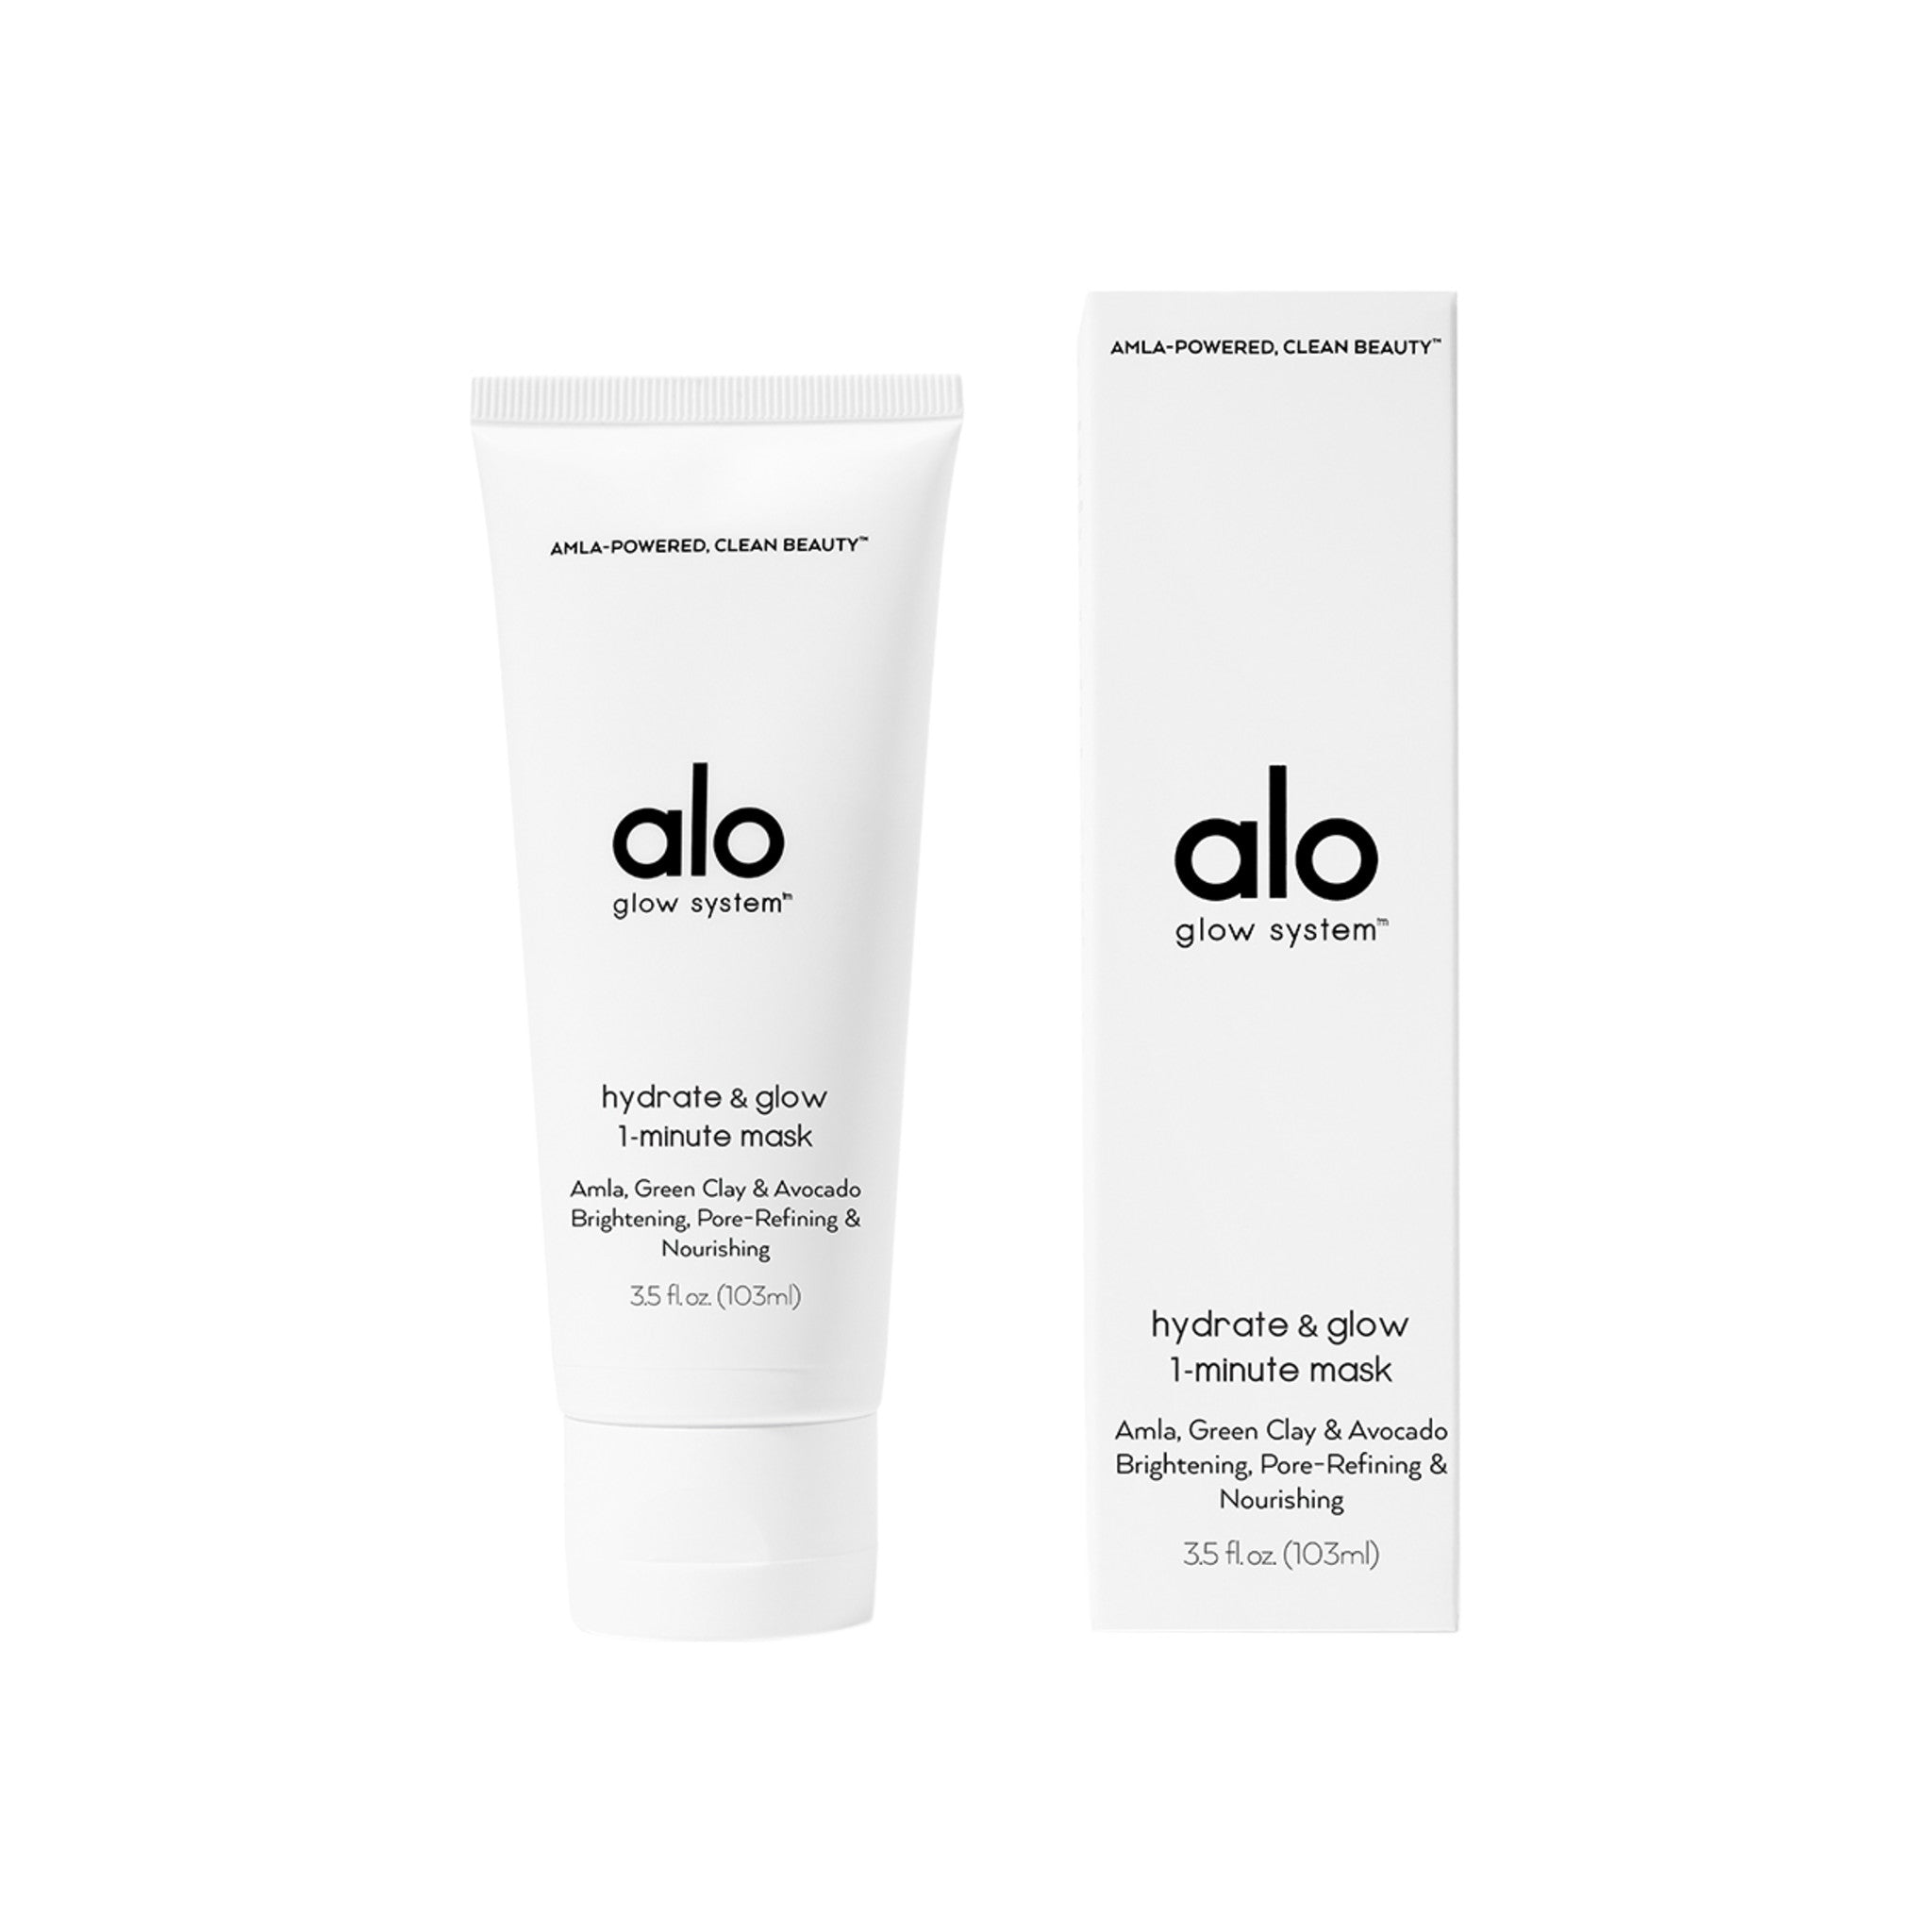 Alo Hydrate and Glow Face Mask main image.